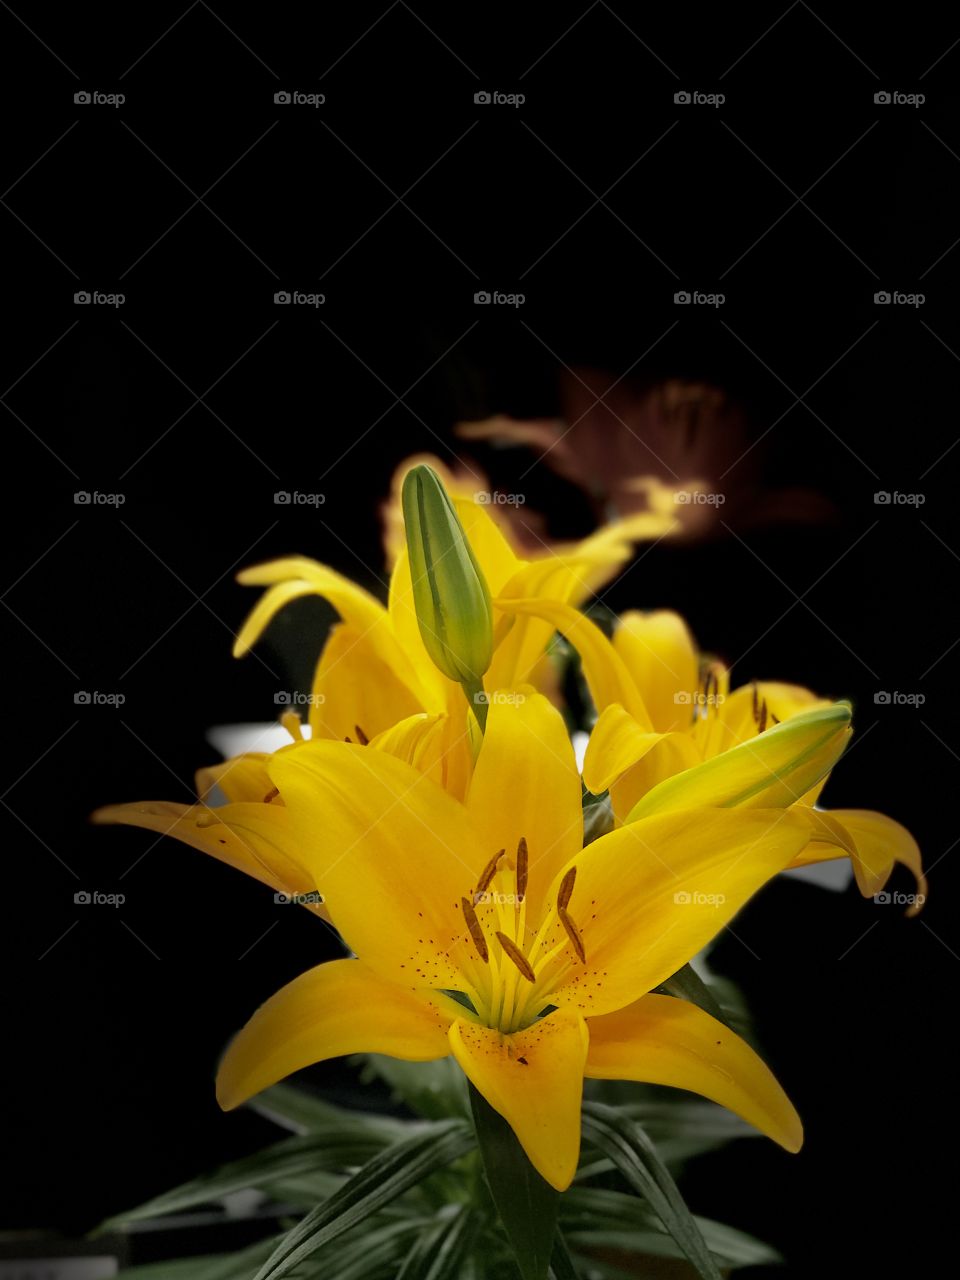 Beautiful Golden Yellow Lily Flowers Close Up Spring Time Photography Darkness Vibrant Colourful Flowers 